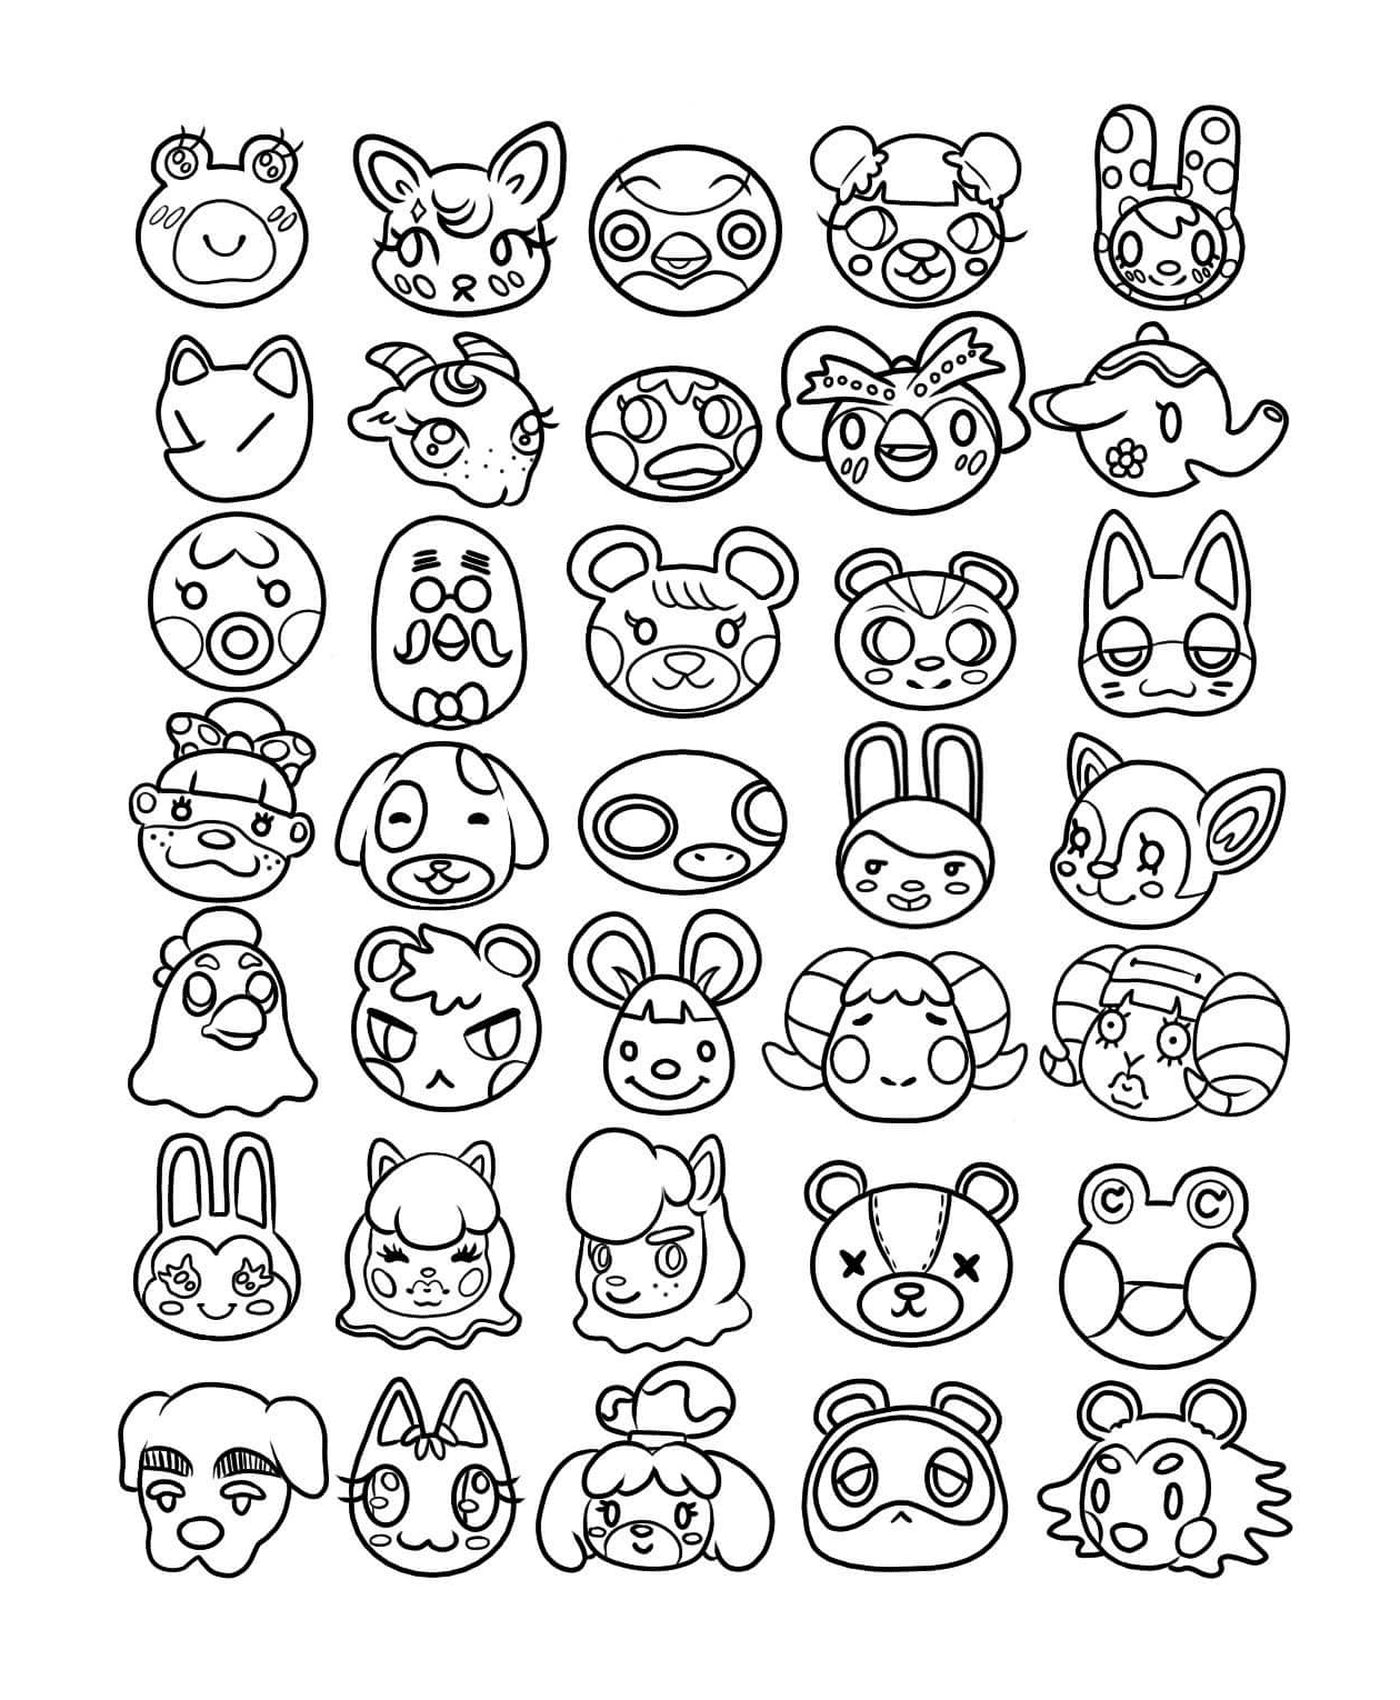  Kawaii, drawing of different animal heads in black ink 